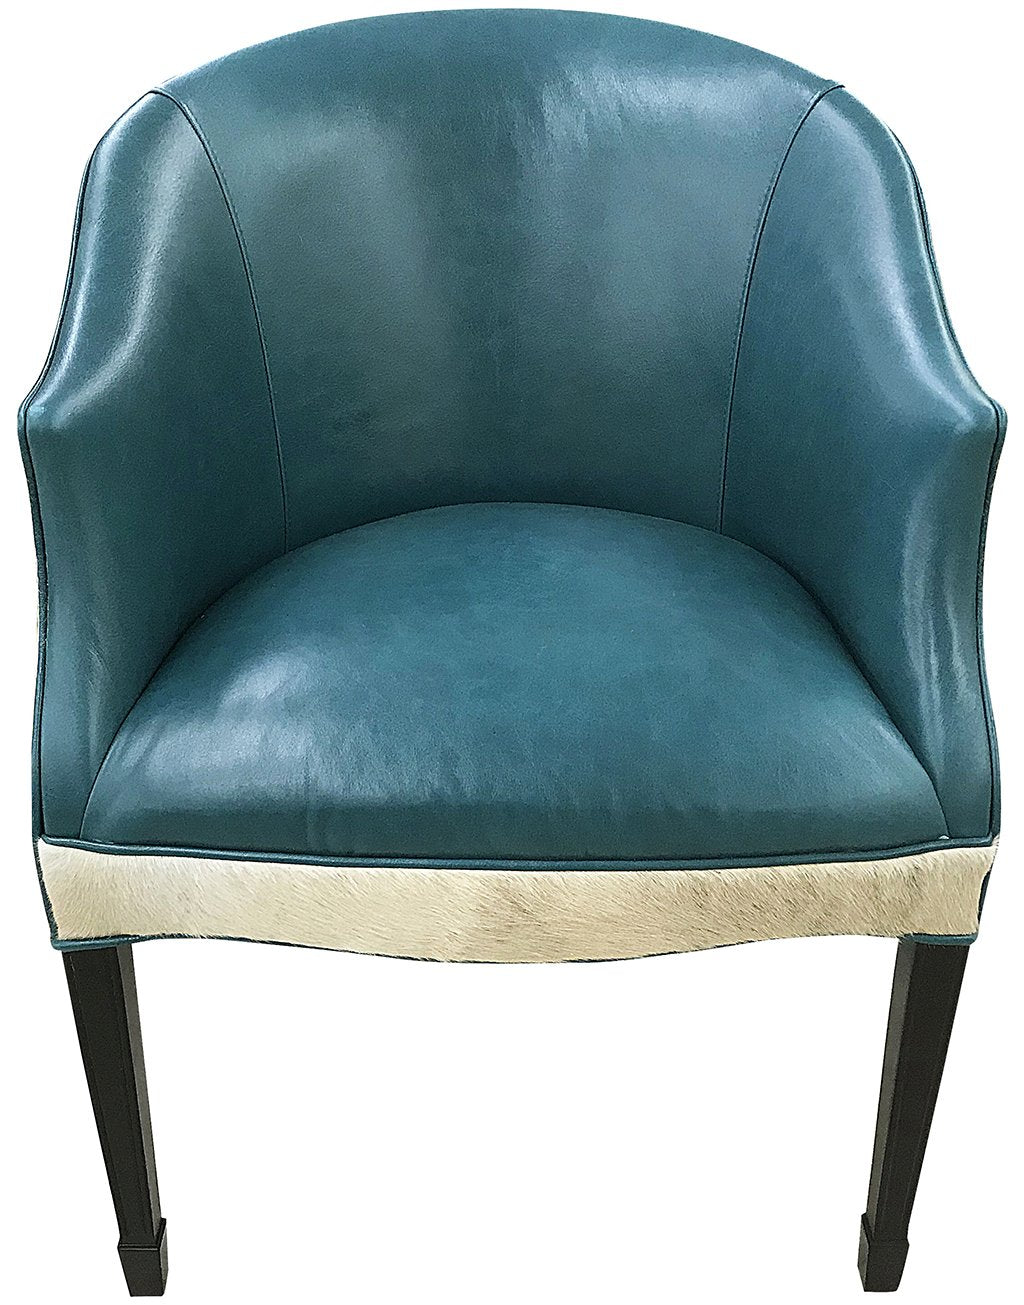 River Rock Lounge or Dining Chair